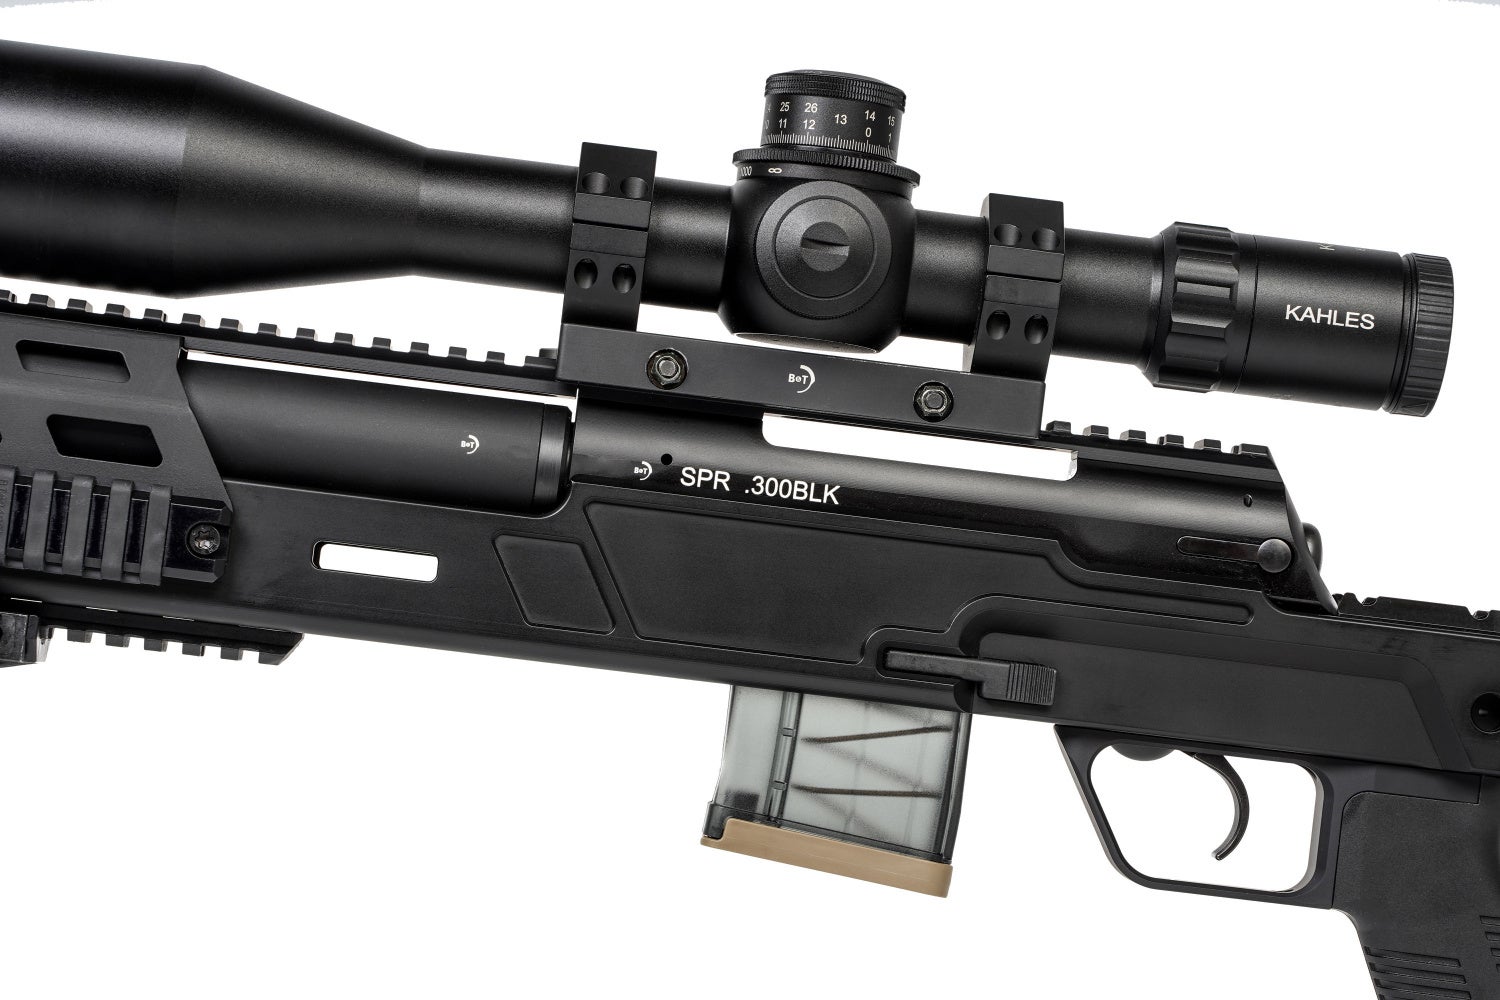 Introducing the New SPR300 Pro Model from B&T